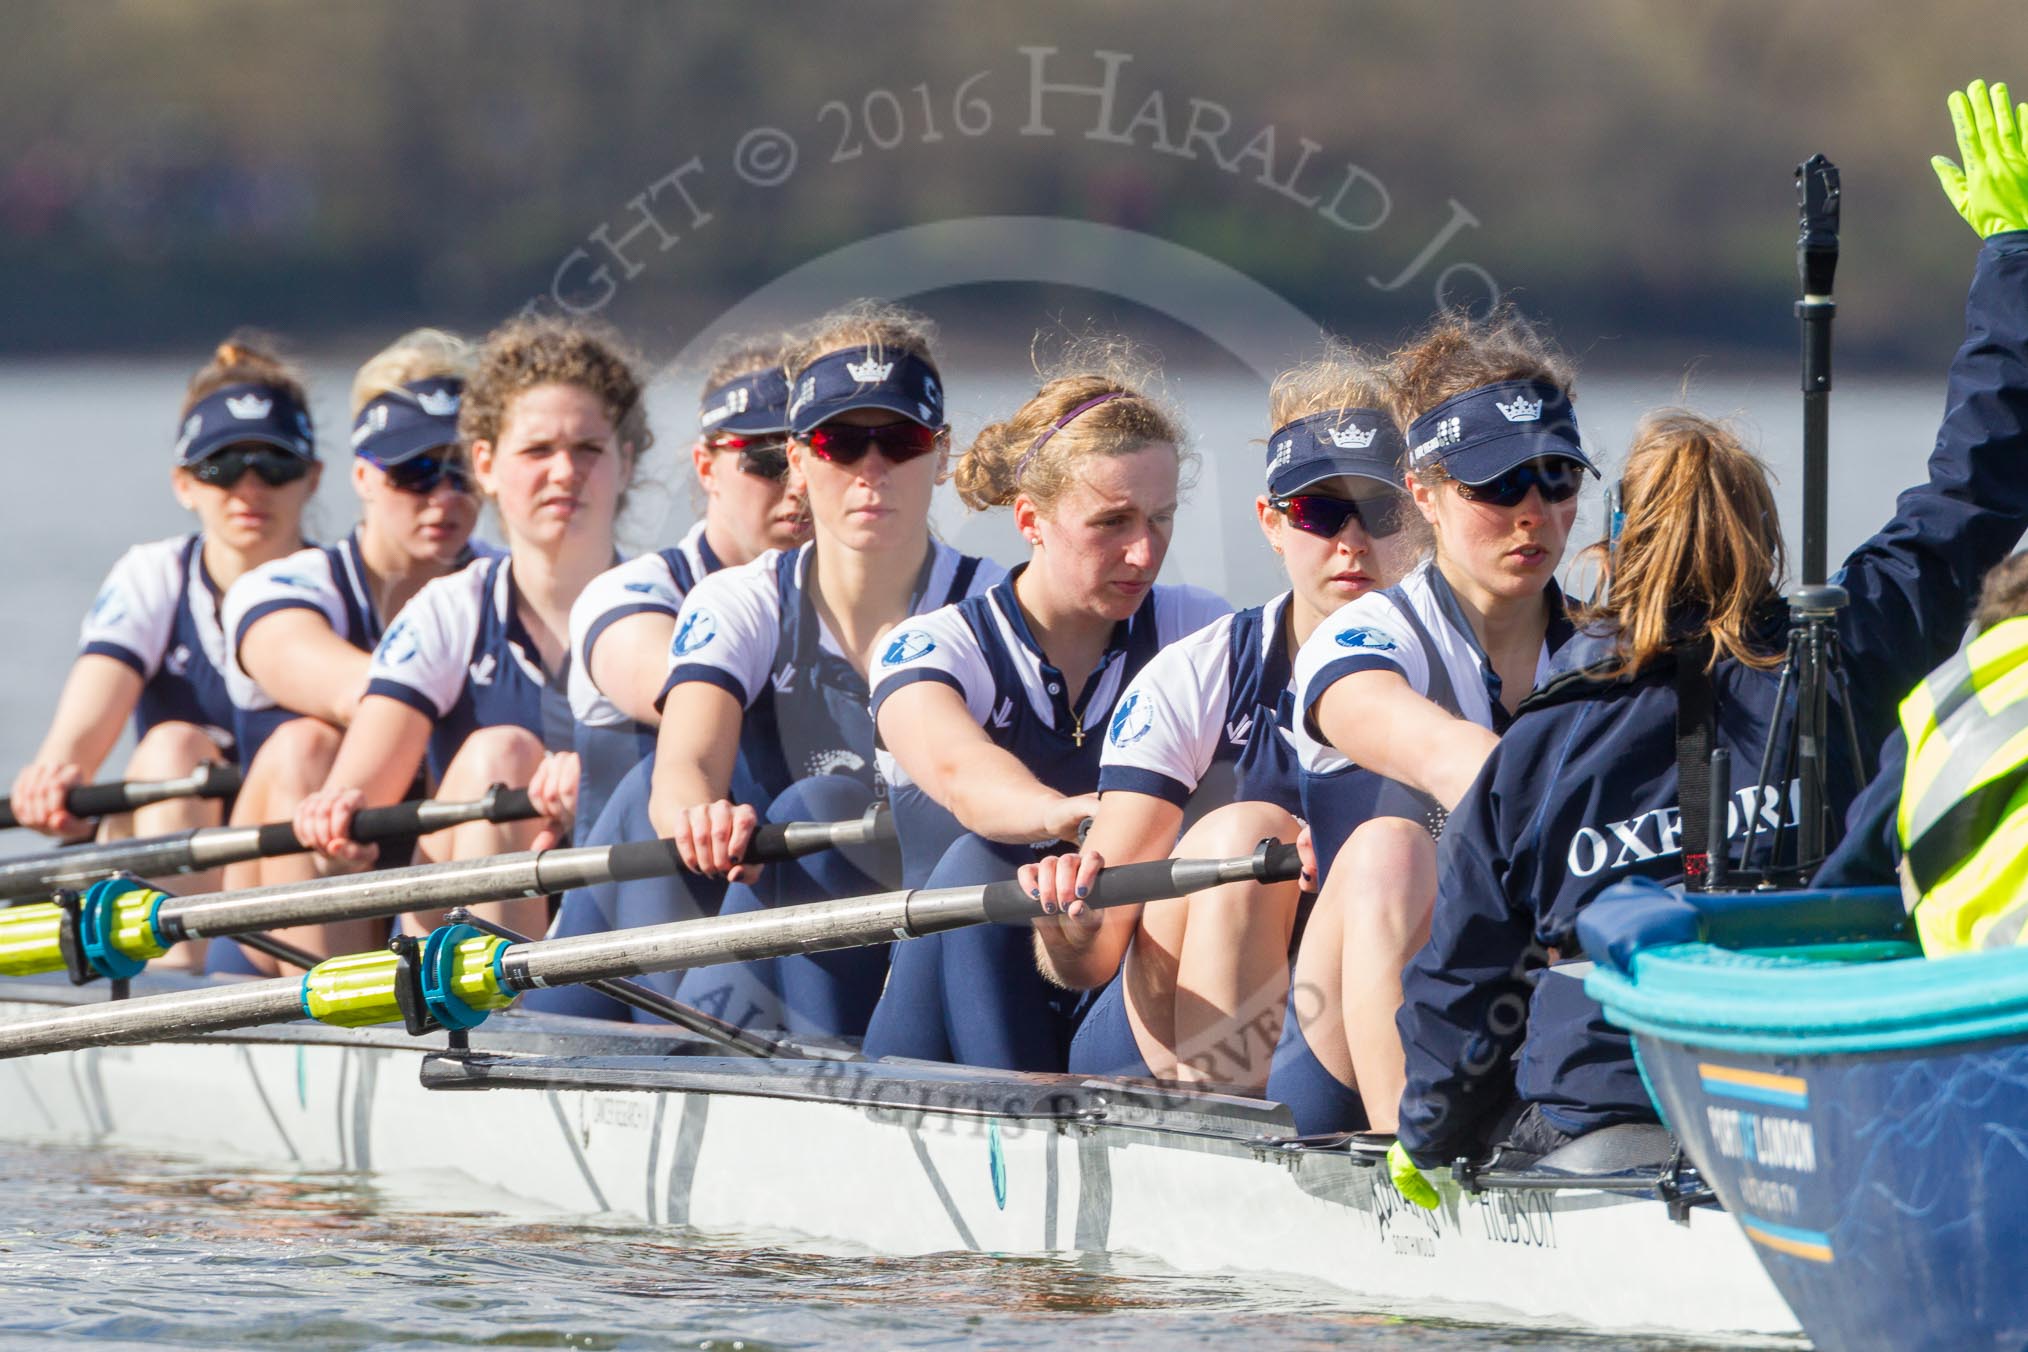 The Boat Race season 2016 -  The Cancer Research Women's Boat Race.
River Thames between Putney Bridge and Mortlake,
London SW15,

United Kingdom,
on 27 March 2016 at 14:10, image #170